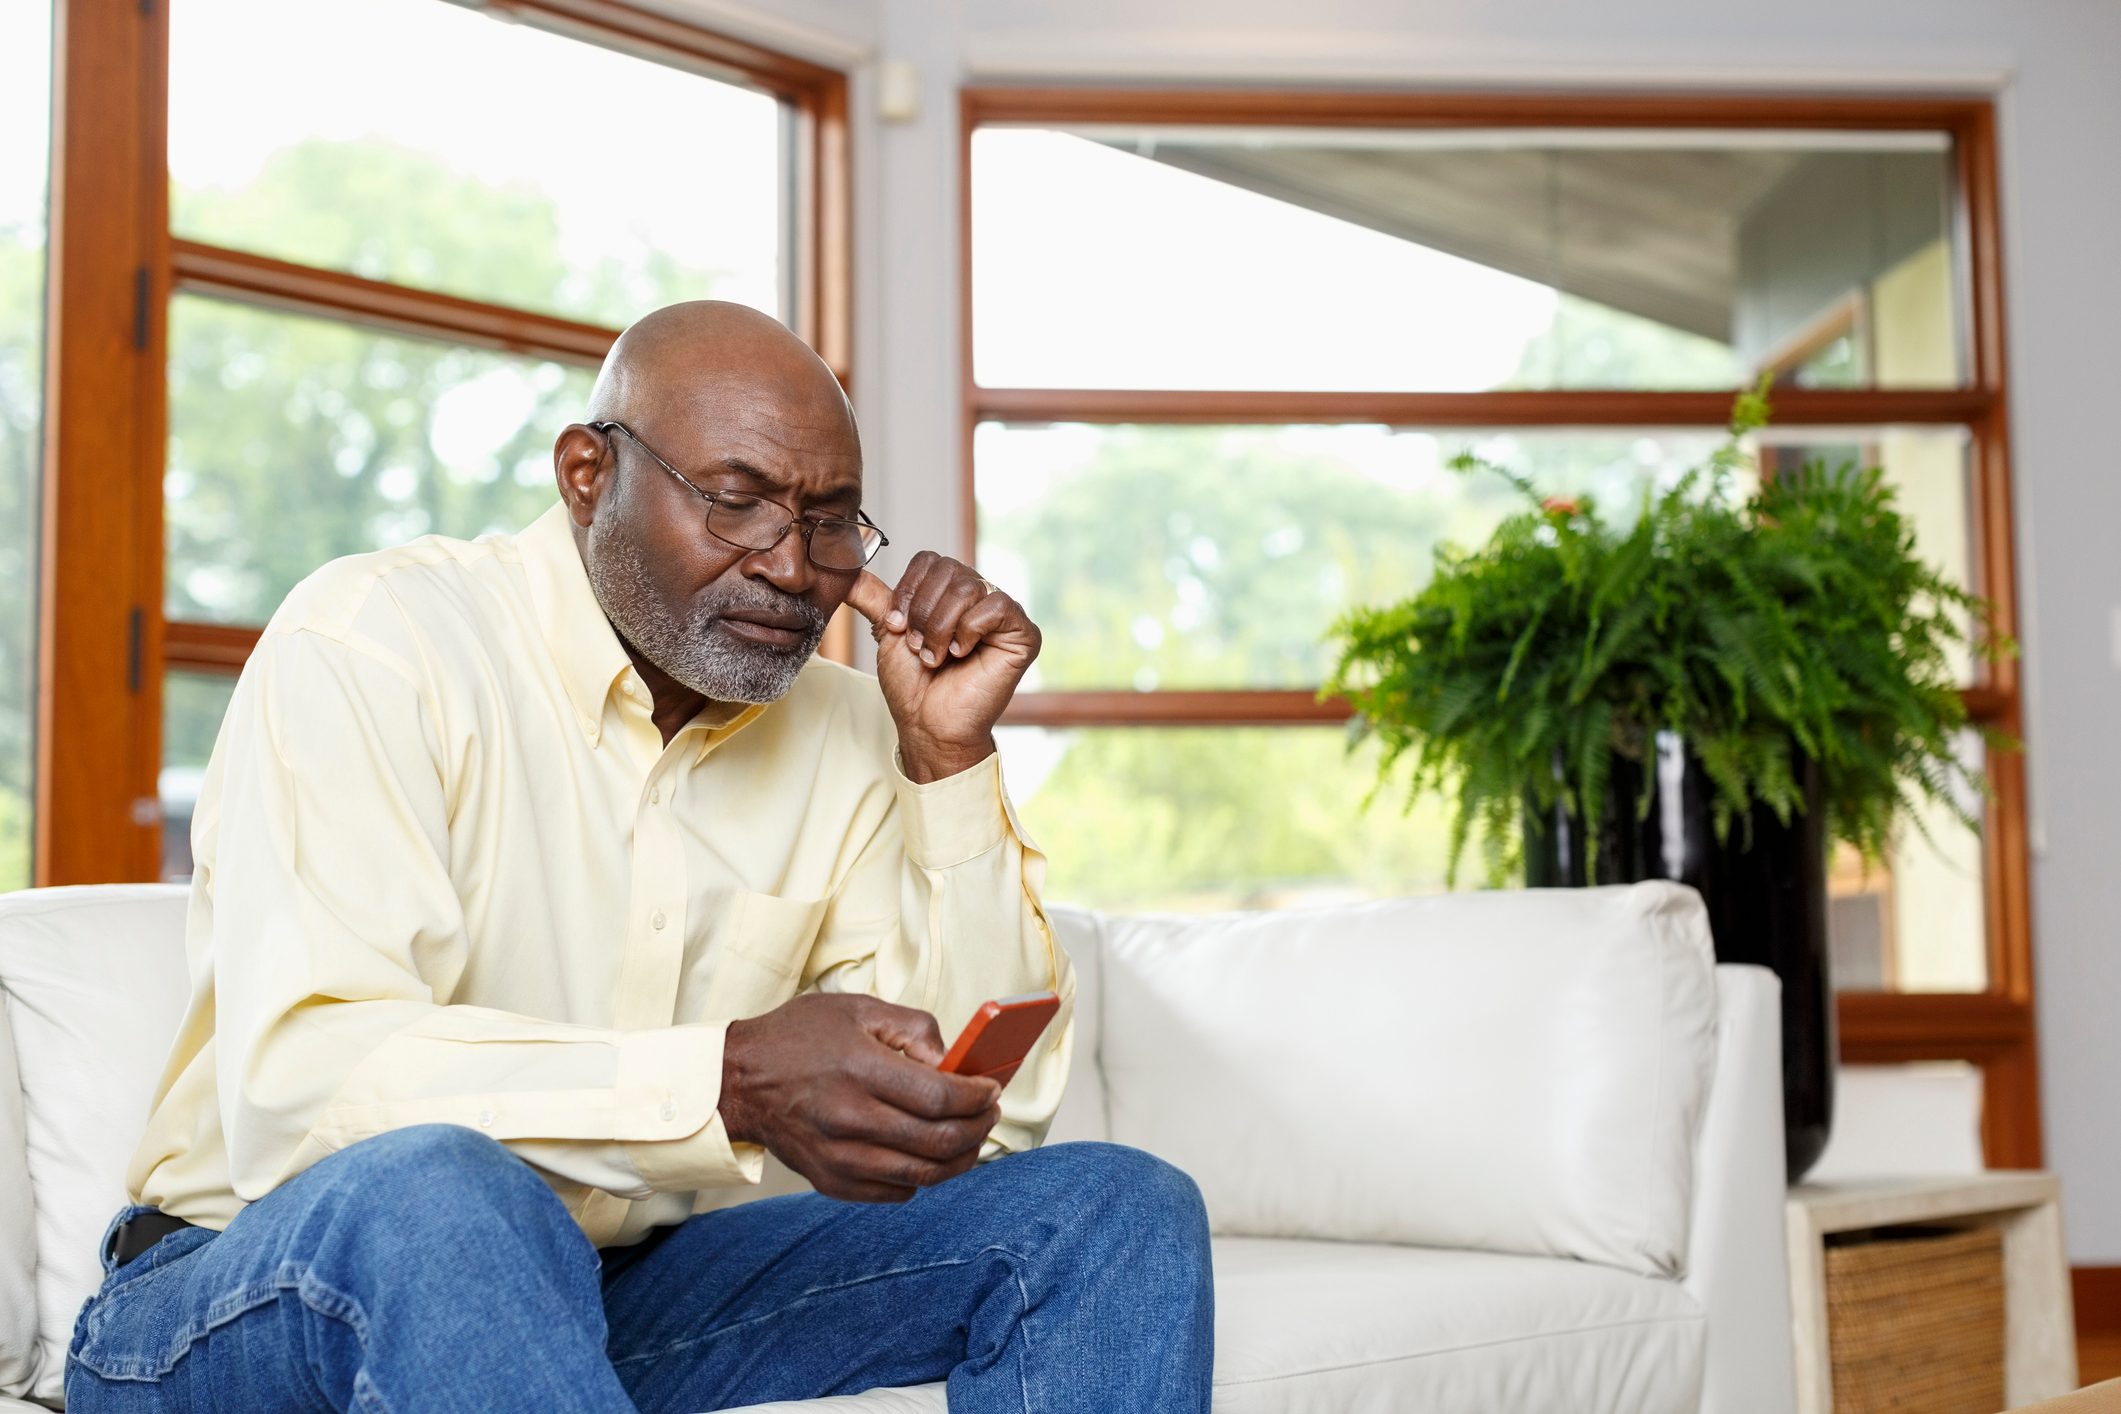 Black man texting with cell phone on sofa